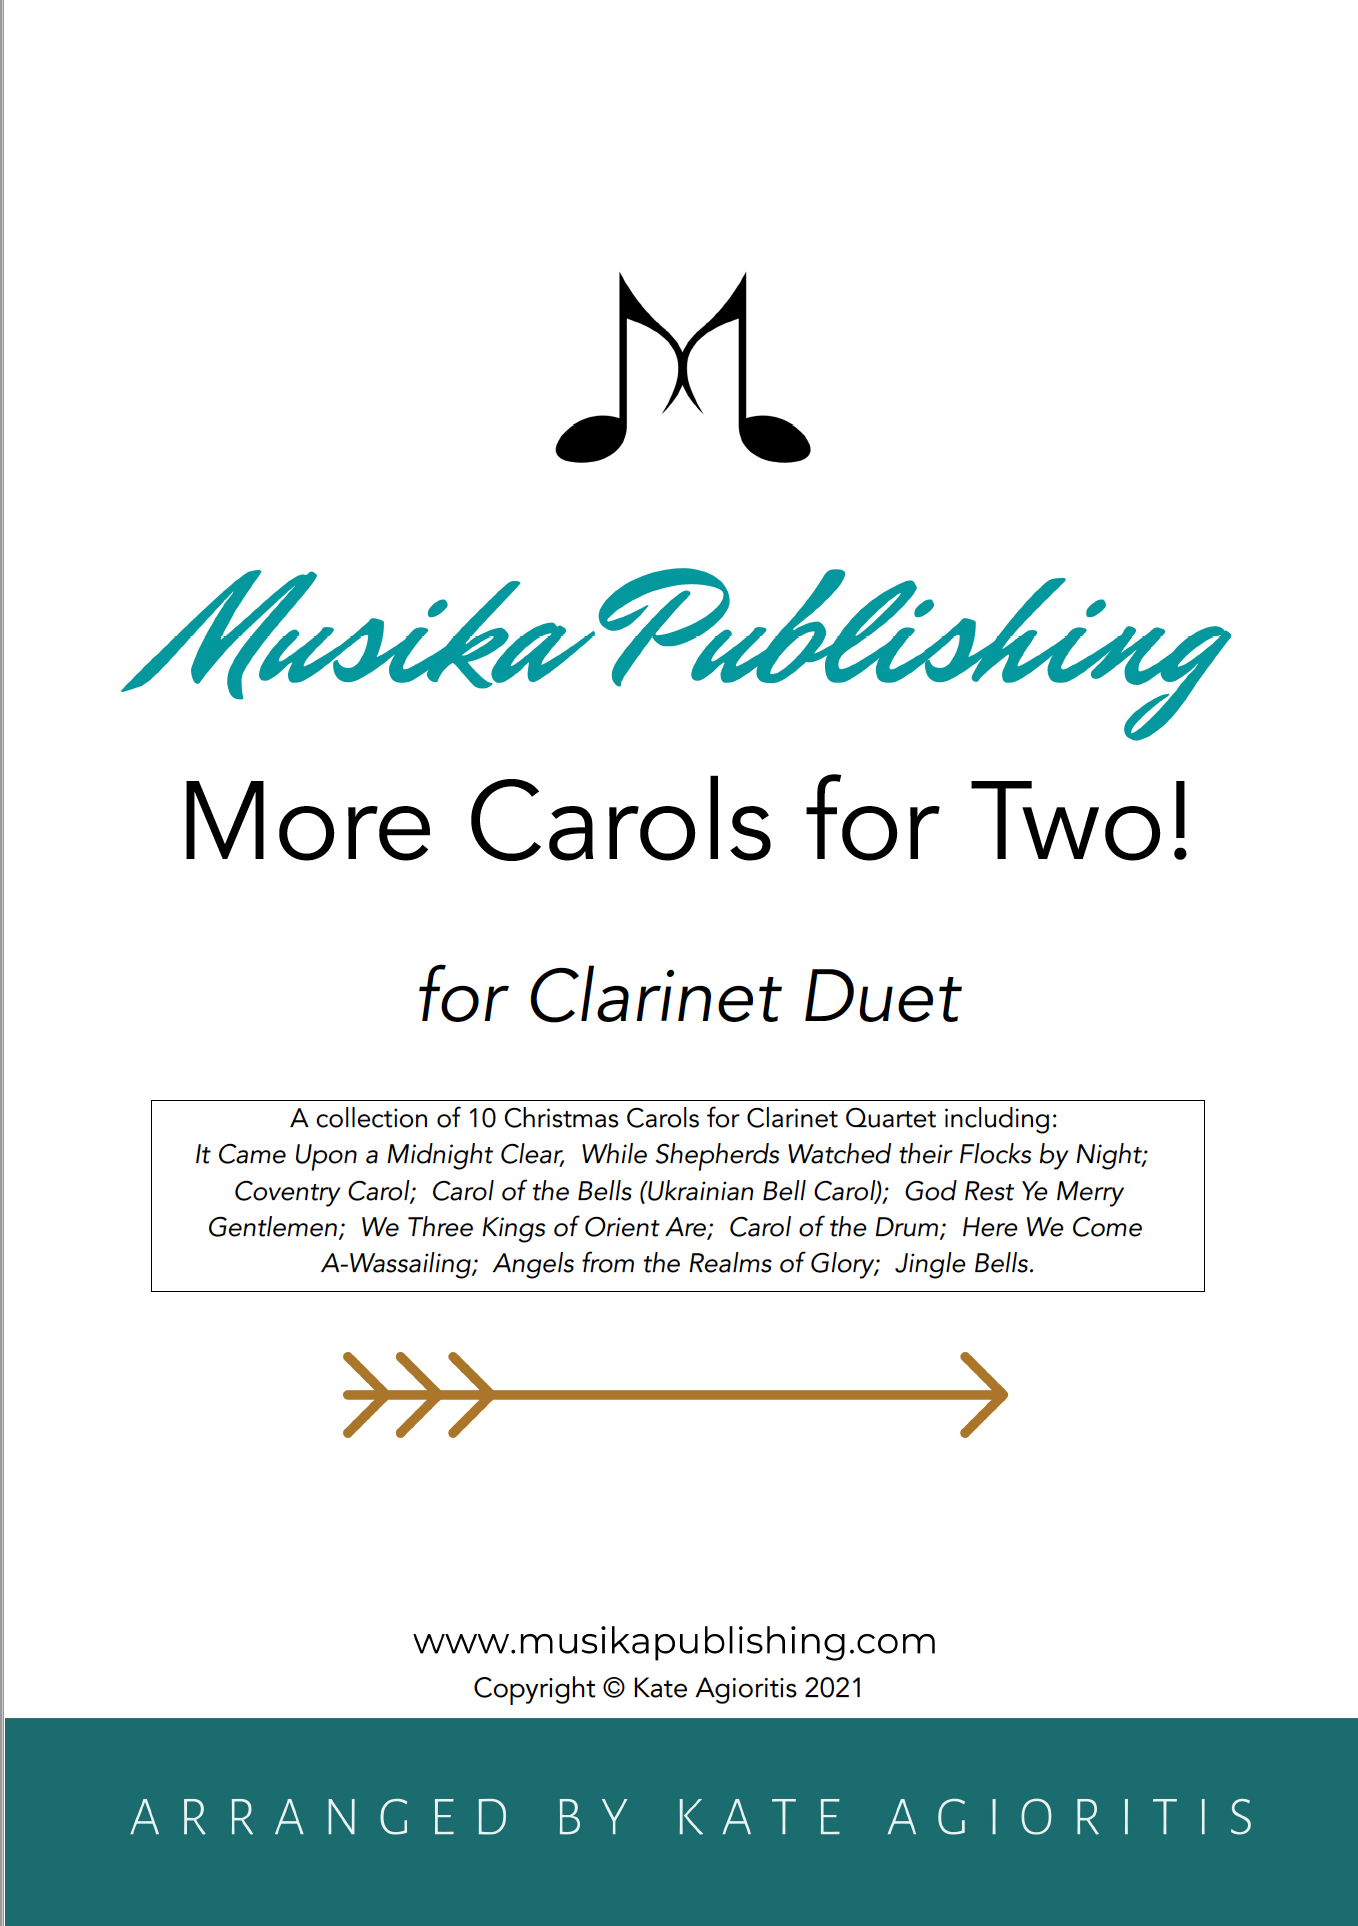 More Carols for Two - Clarinet Duet